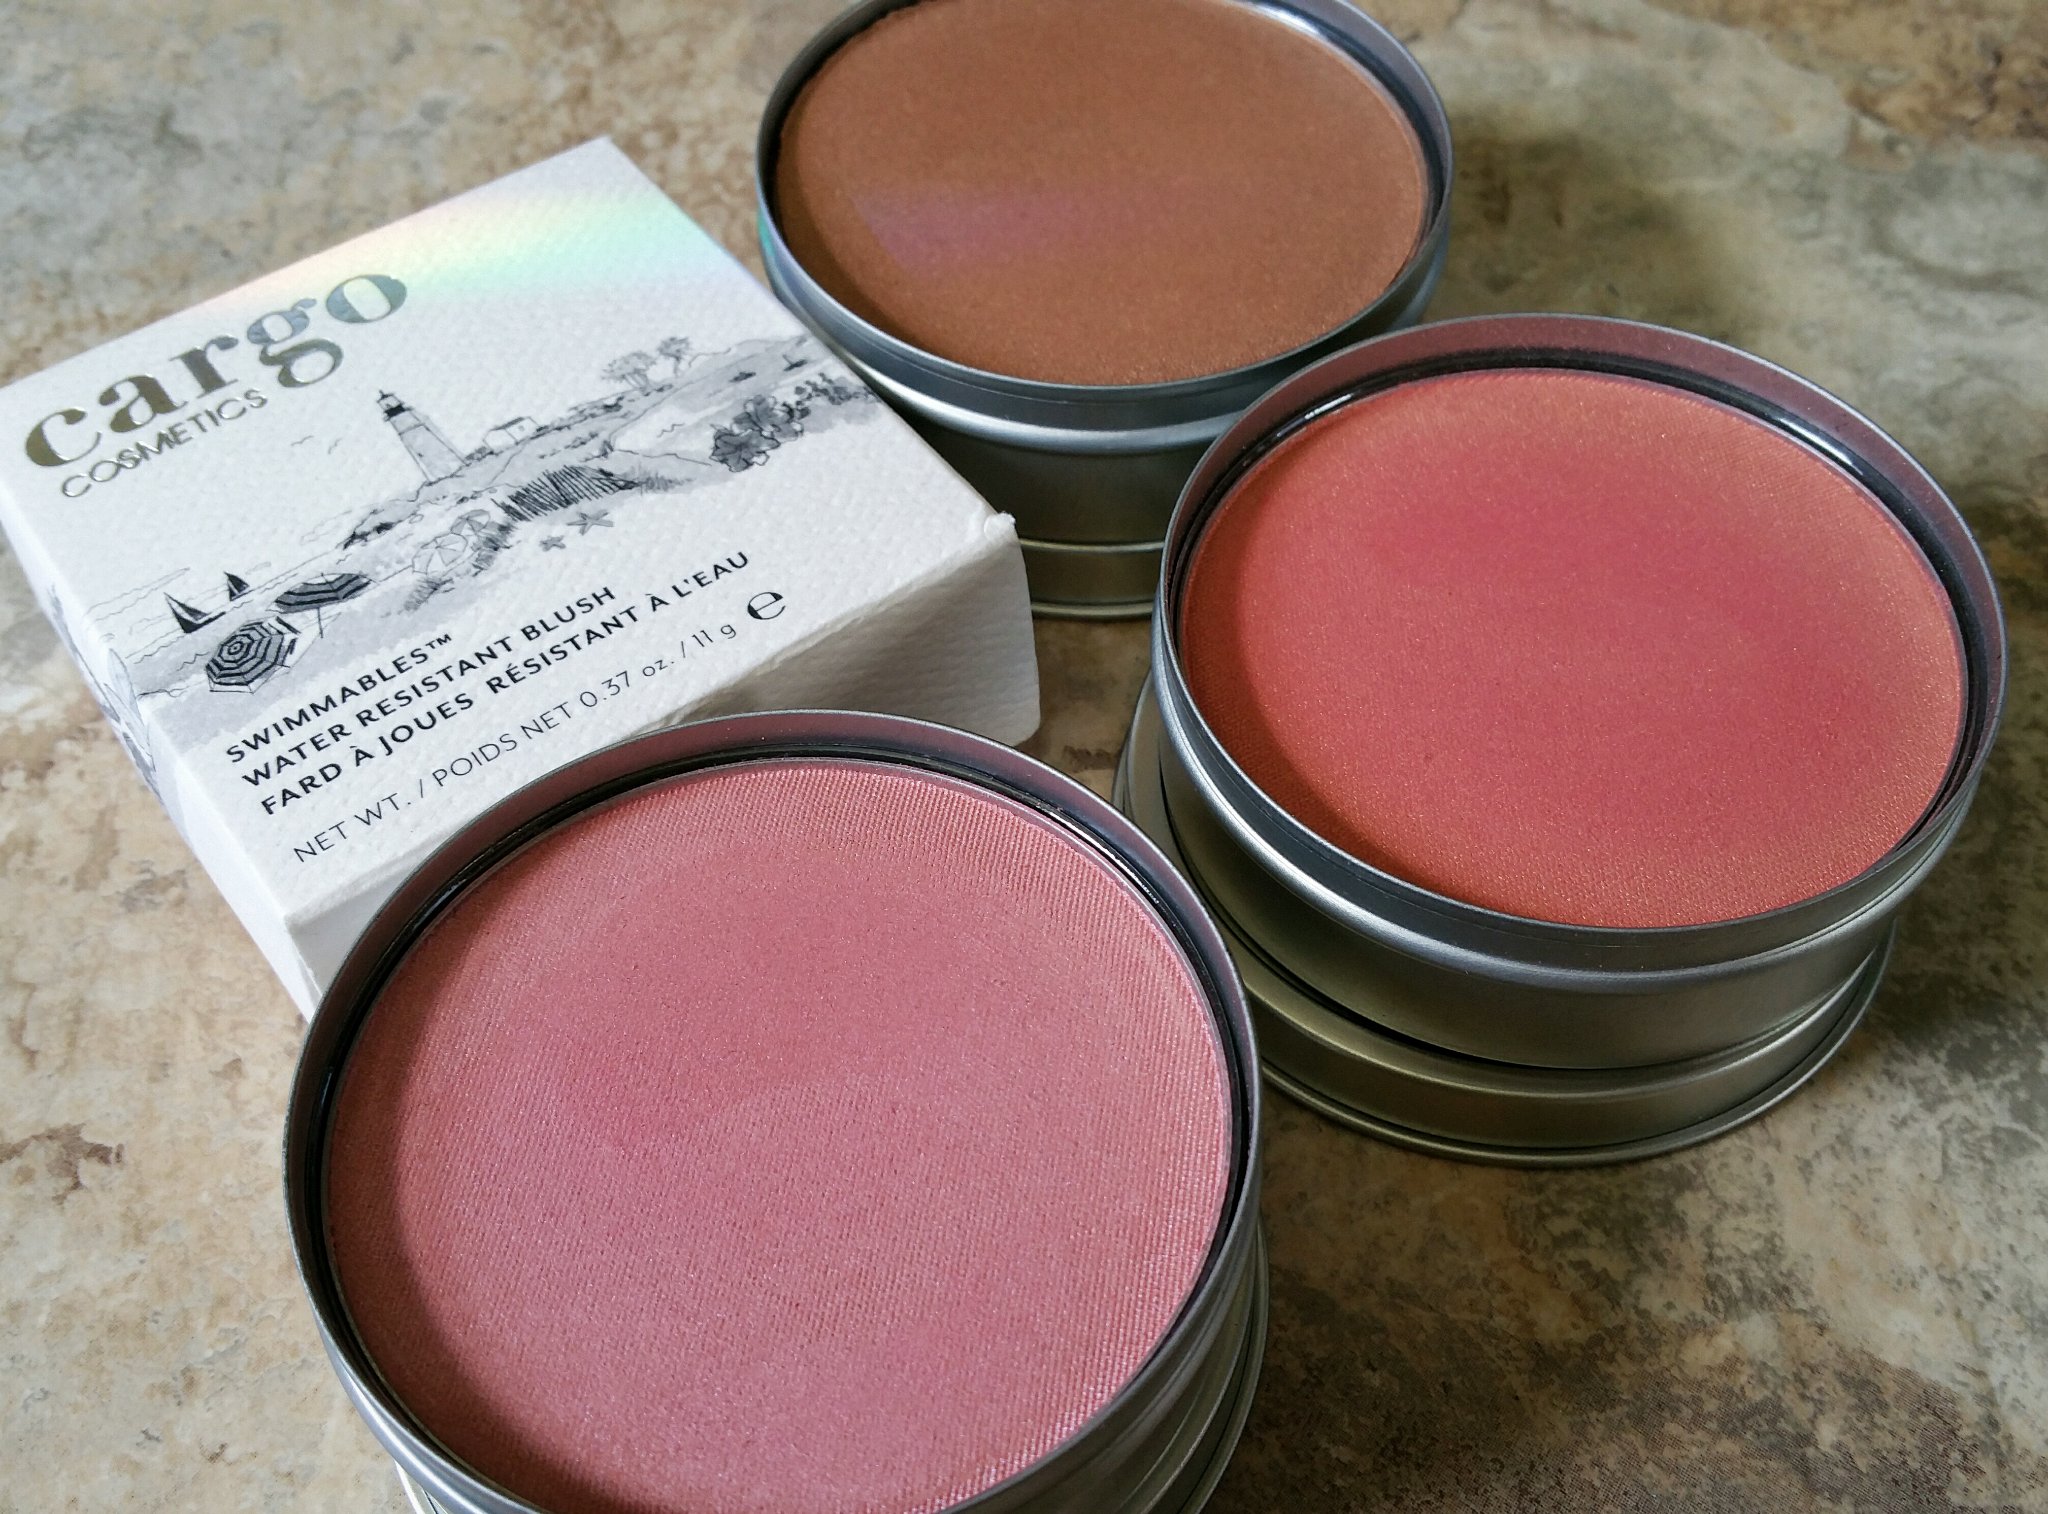 Cargo cosmetics, cargo, swimmables, blush, face products, cosmetics, makeup, beauty, swatches, cargo blush and bronzer, blush, bronzer, contour, highlight, review, beauty review, makeup review,